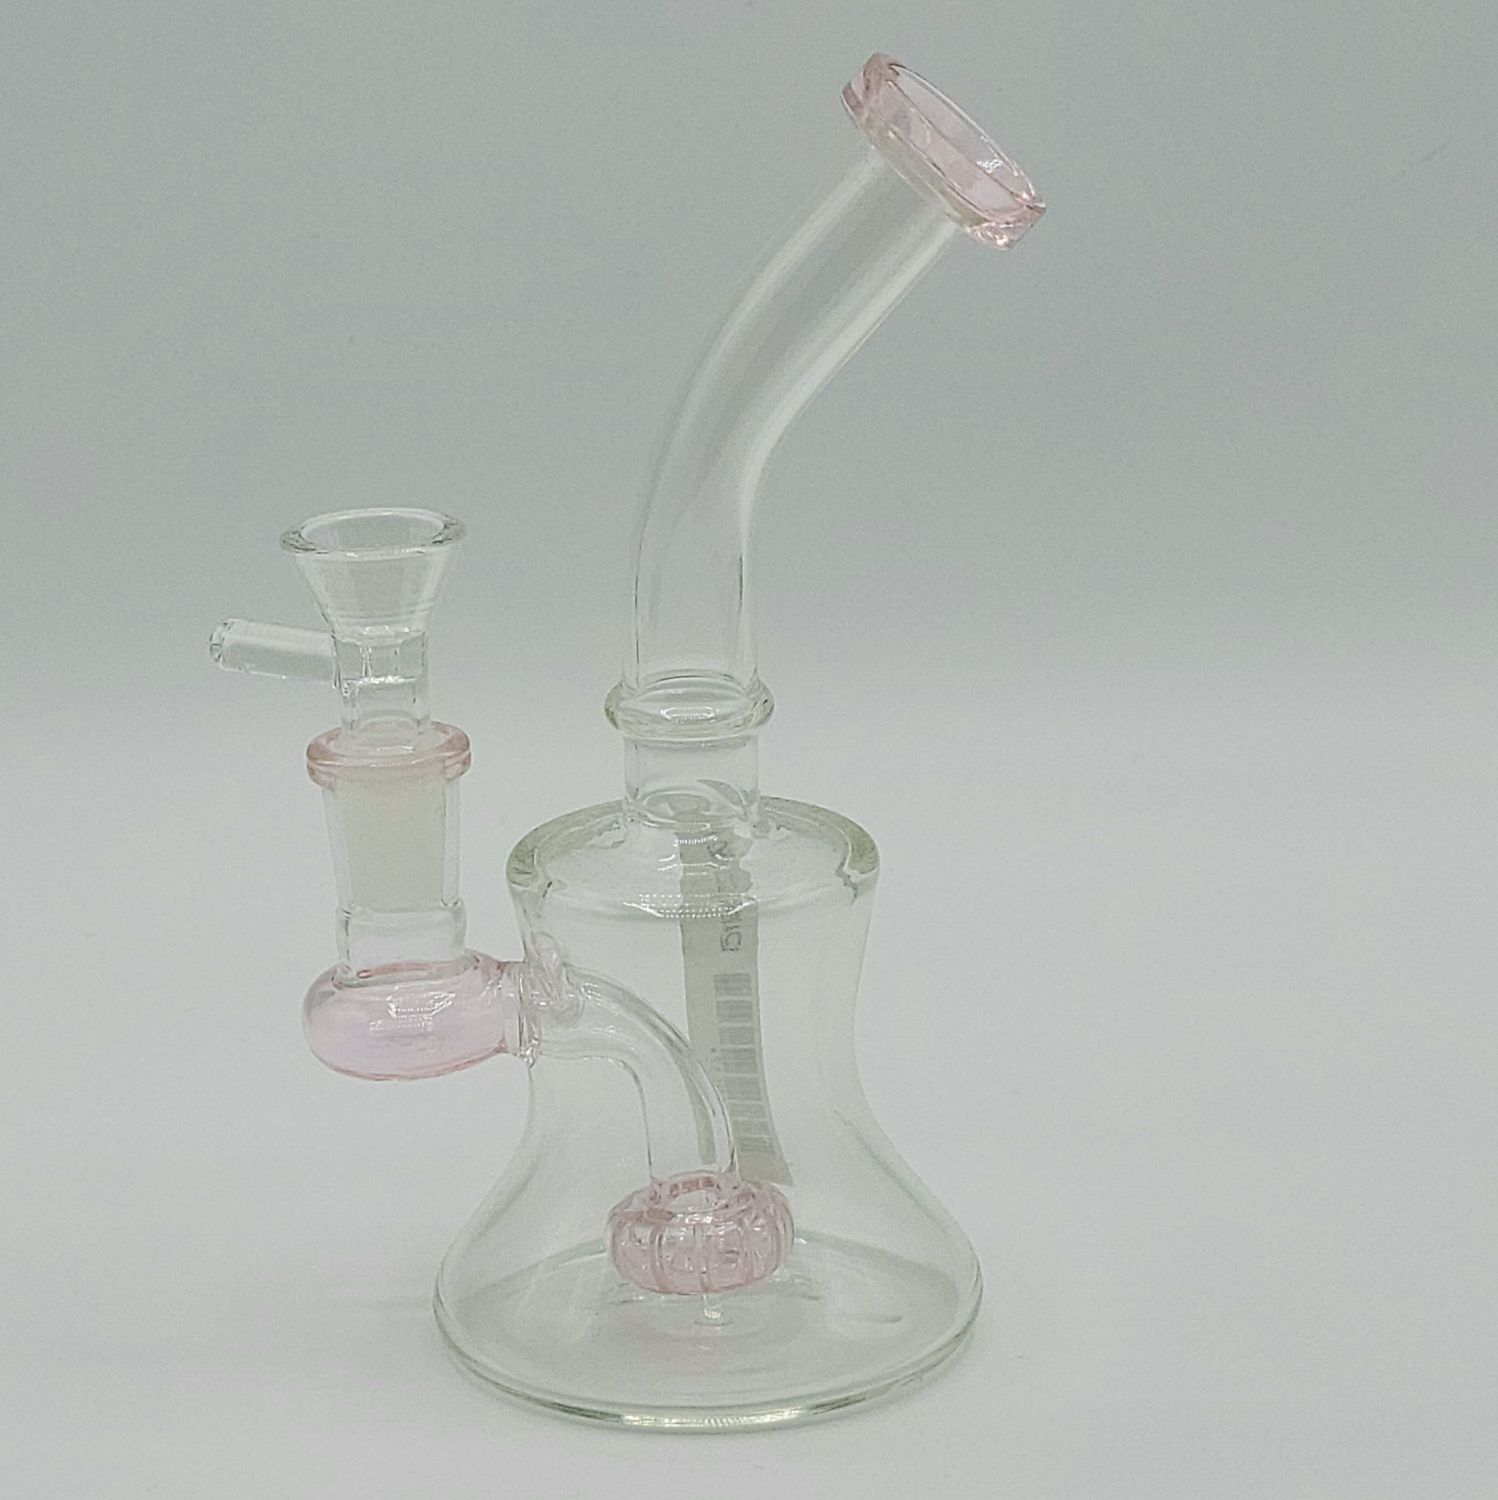 https://www.esmokeshop.com/images/frontend/cproducts/zoom/110137/6.5-inch-clear-glass-bong-tilted-tip-with-percolator-pink-ts210506094002436727.jpg